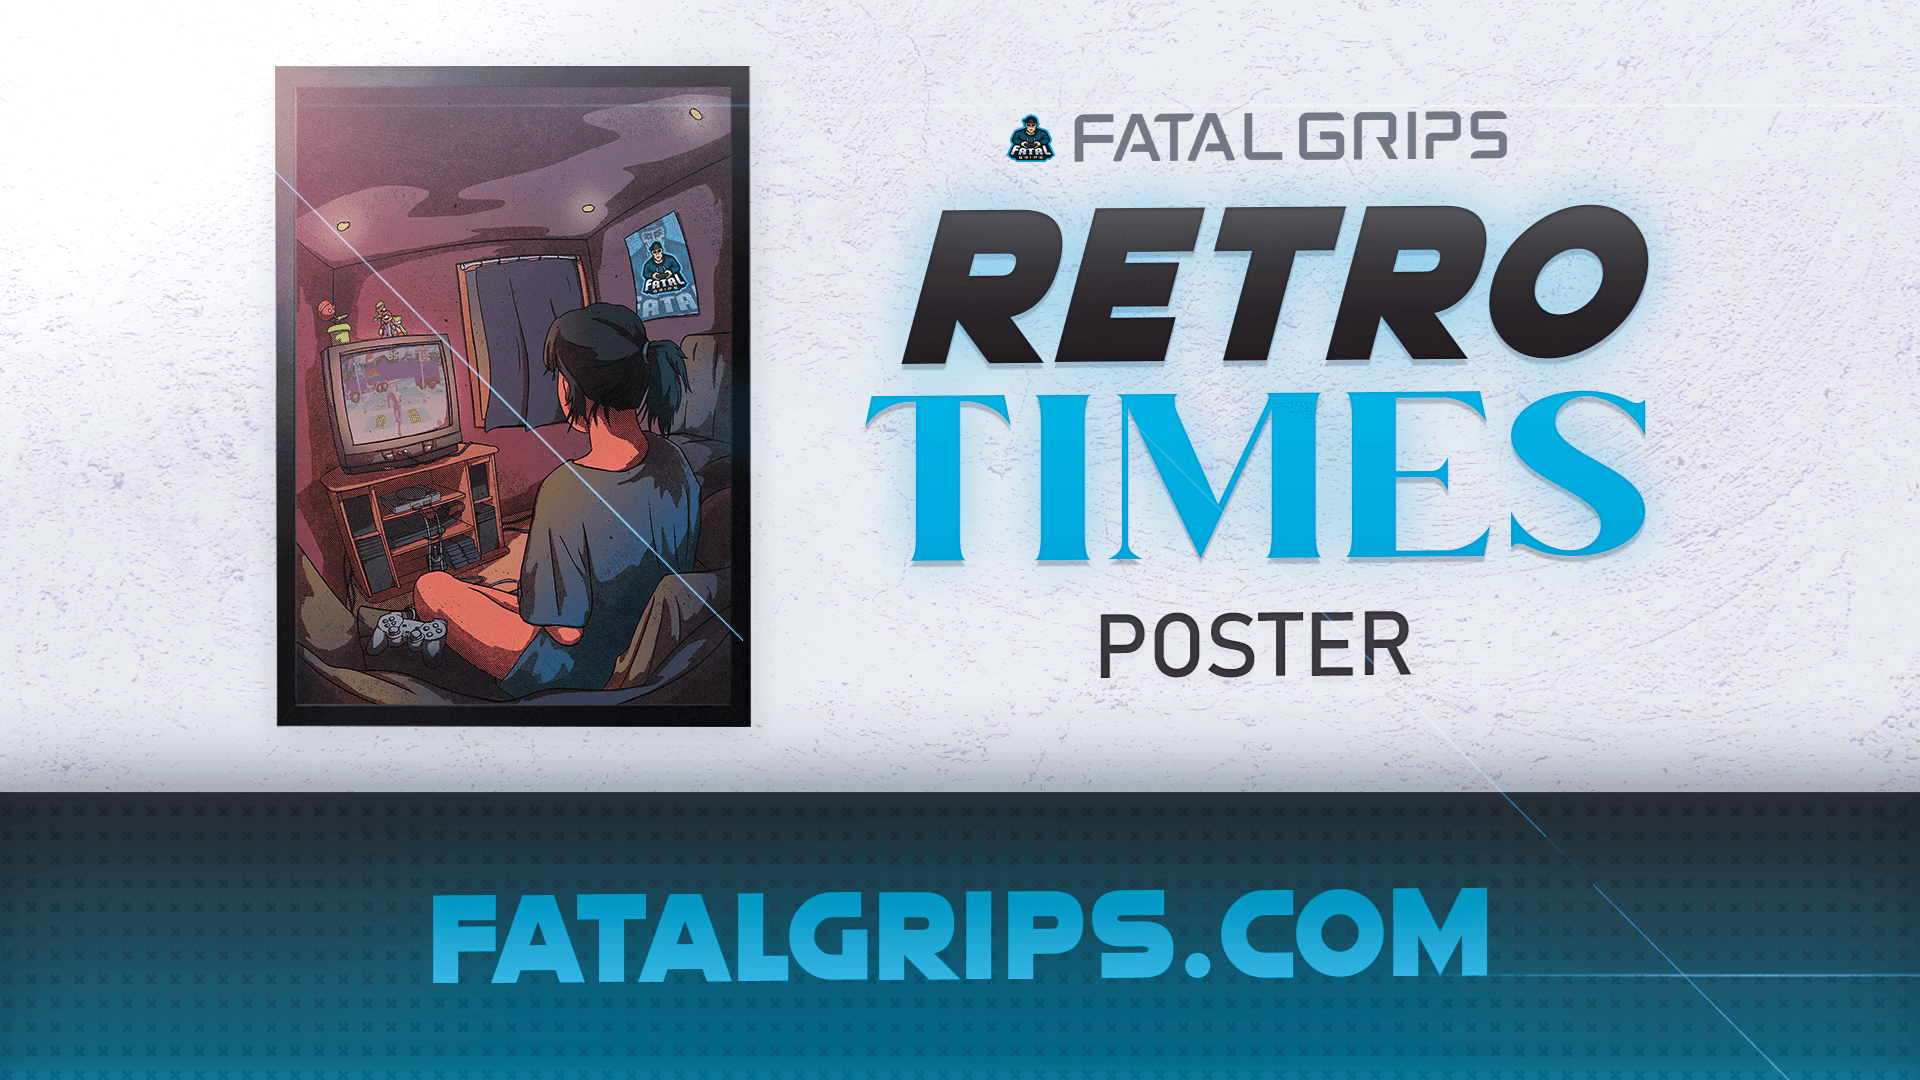 Retro Times Poster - Fatal Grips